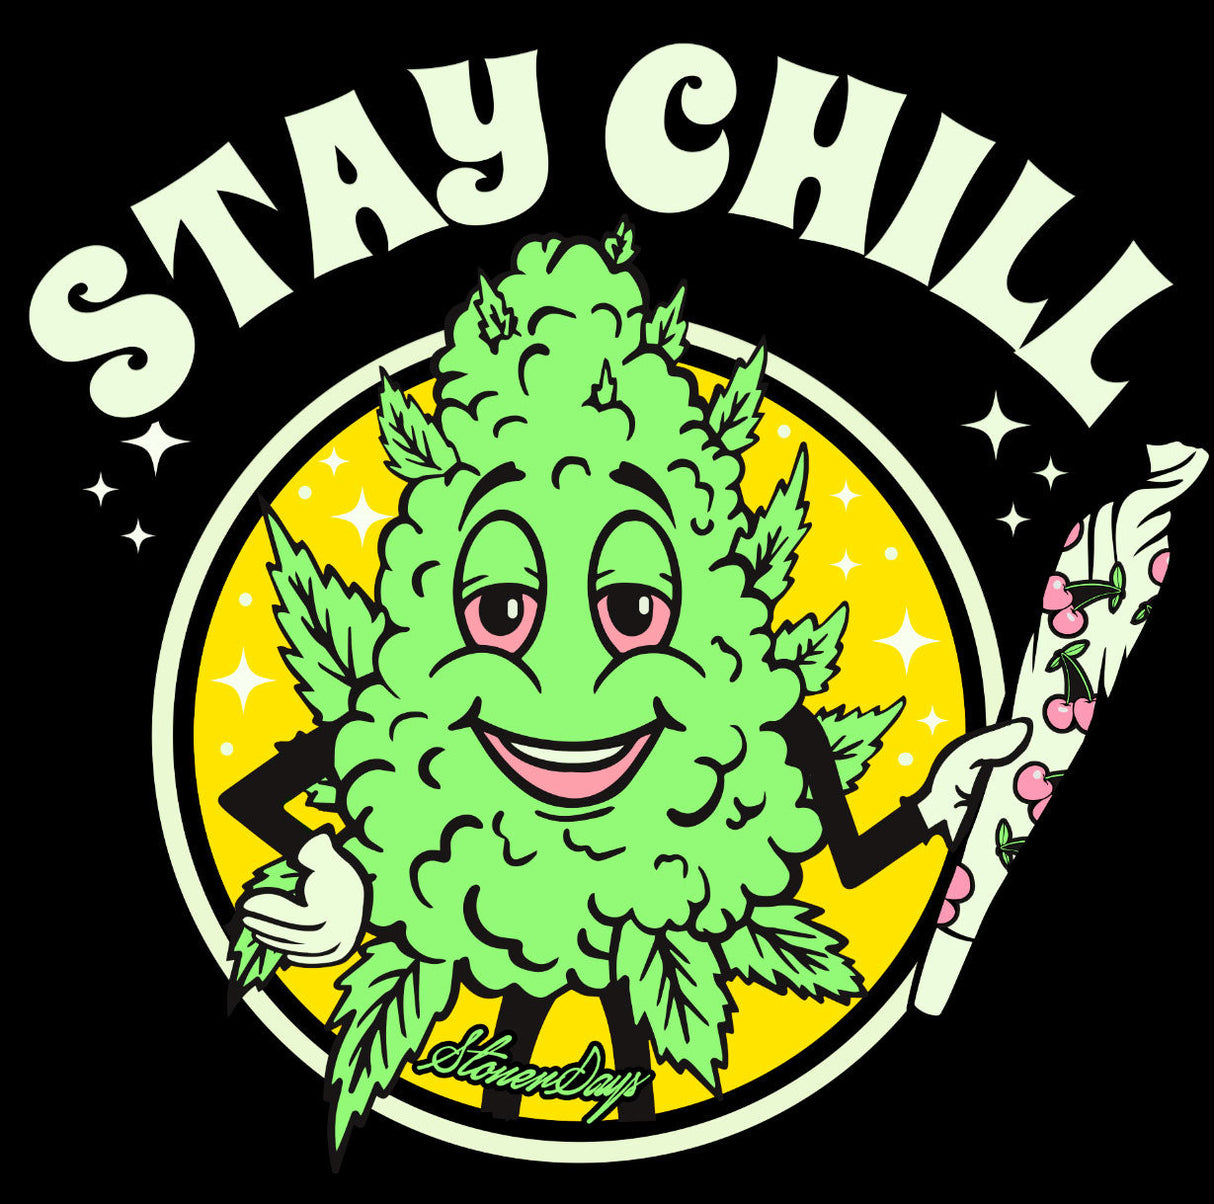 StonerDays Stay Chill long sleeve cotton t-shirt with smiling cannabis leaf graphic